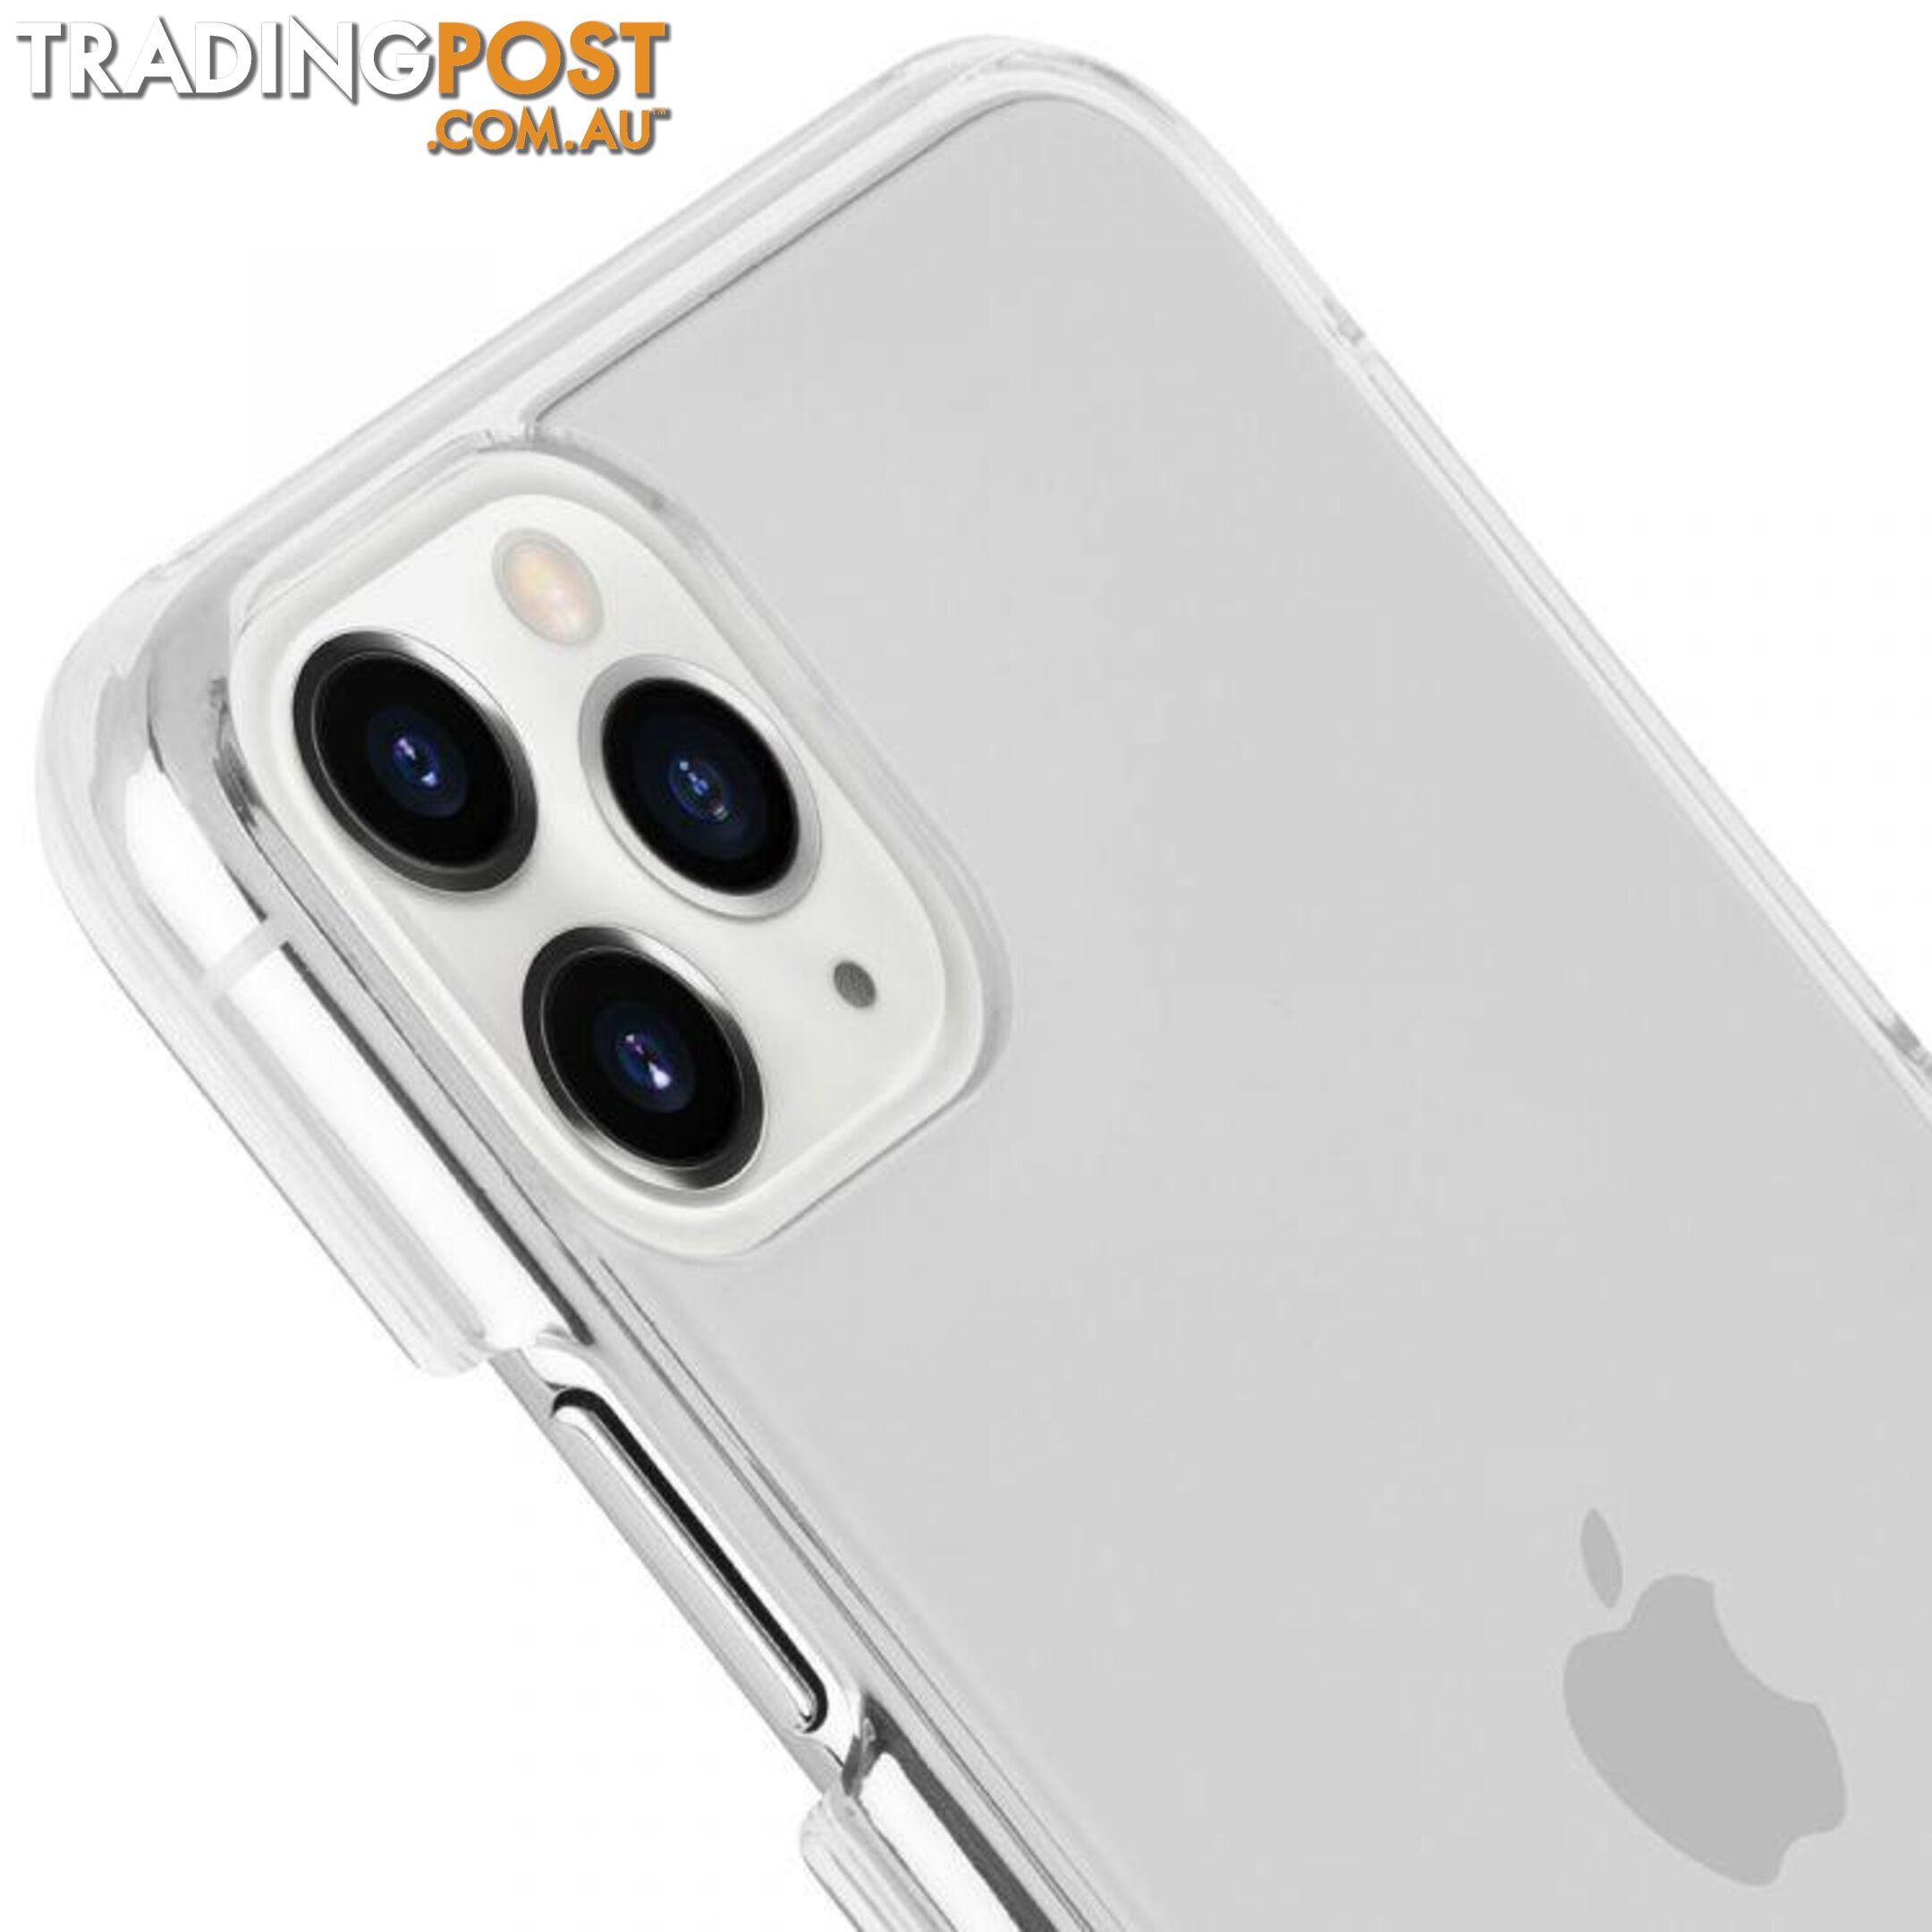 Case-Mate Barely There Case For iPhone 11 Pro - Case-Mate - Clear - 846127187589